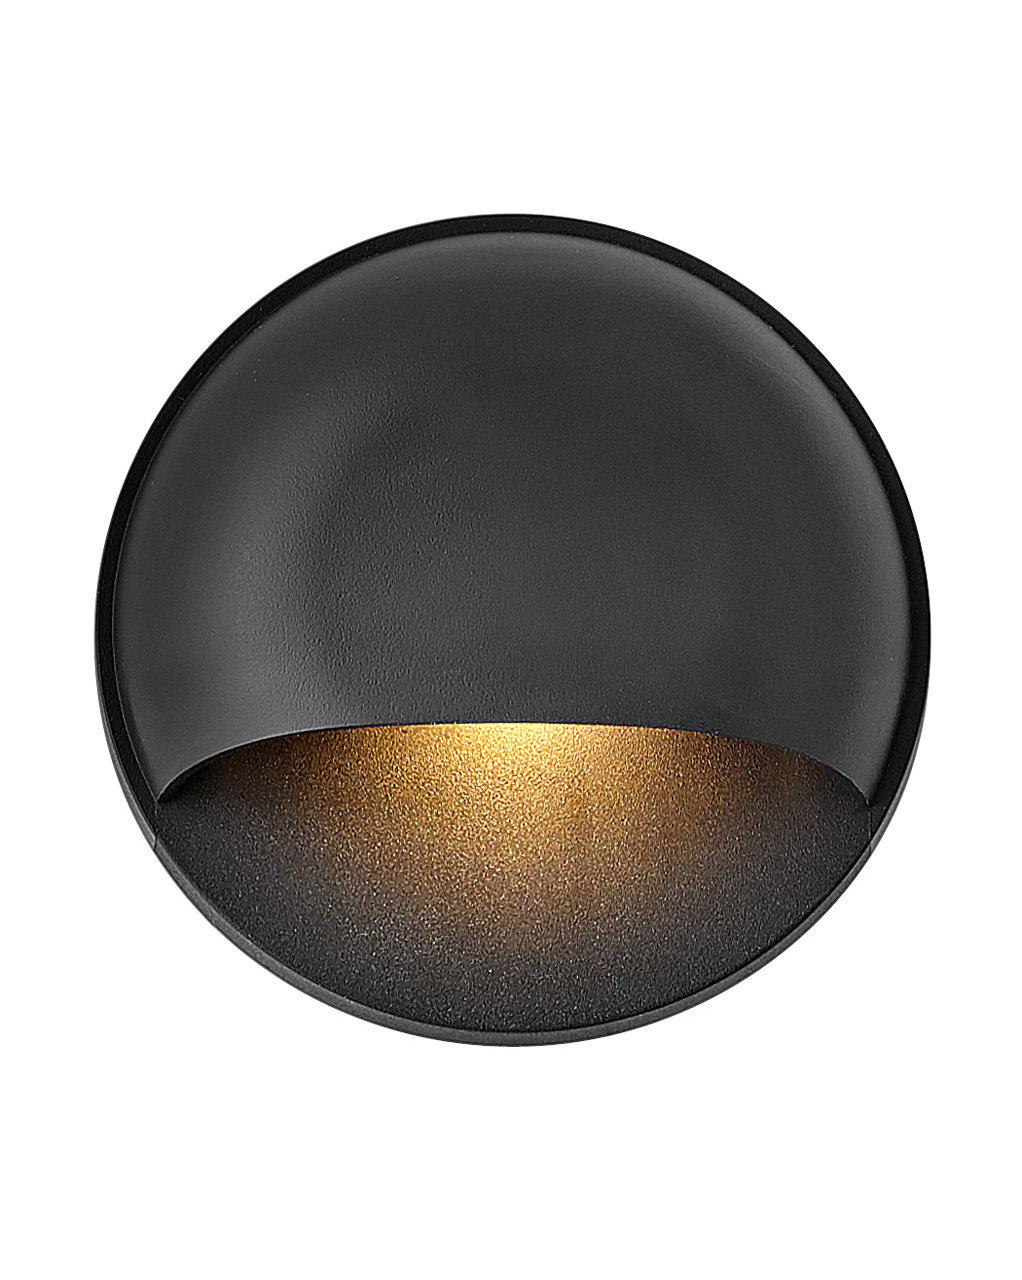 Hinkley  Nuvi Round Deck Sconce Outdoor l Wall Hinkley   